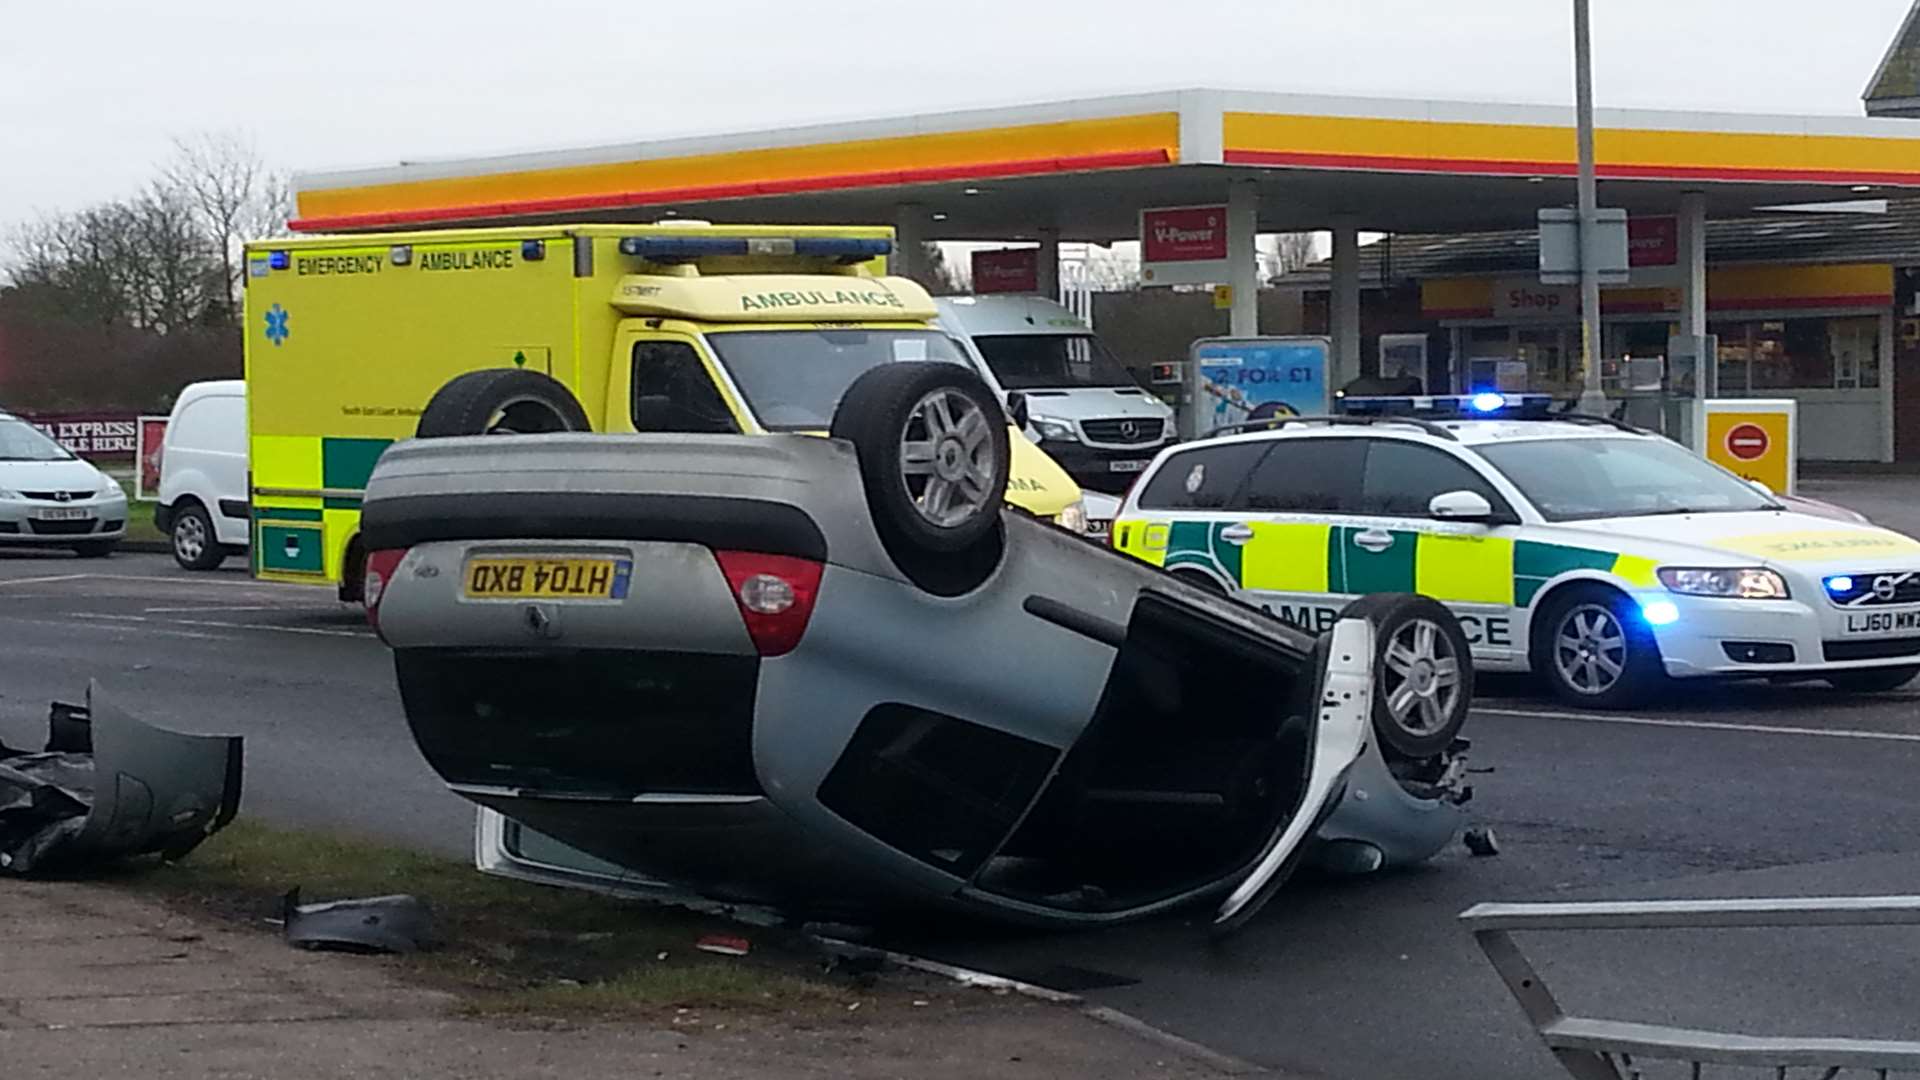 Overturned car on Chestfield roundabout